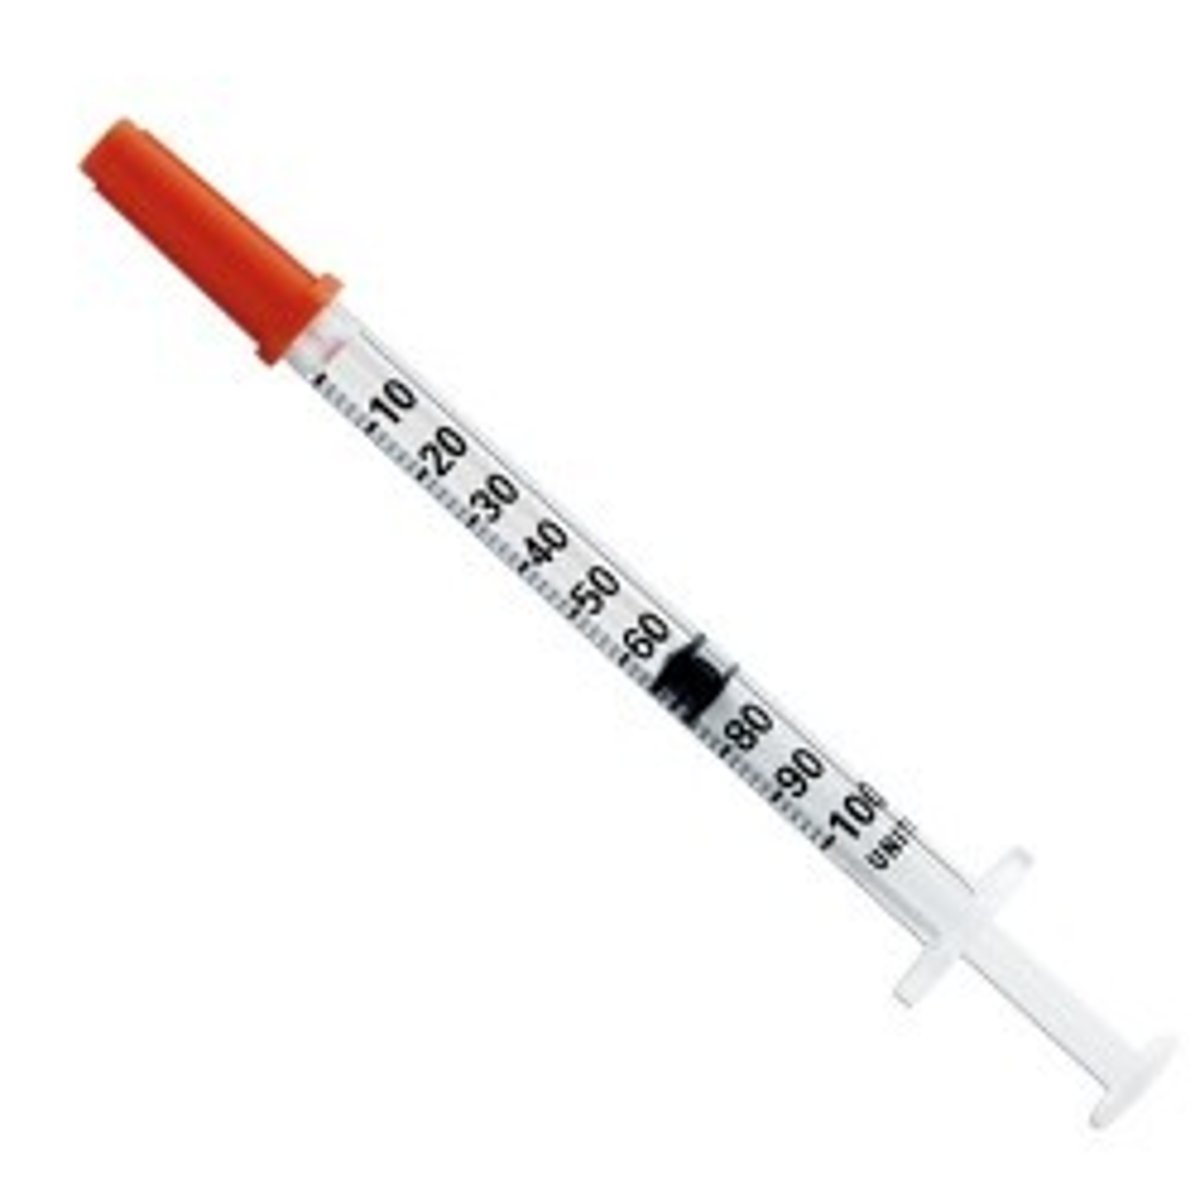 <p>made specifically for self injections and have friendly features: shorter needles, as insulin injections are subcutaneous (under the skin) rather than intramuscular, finer gauge needles, for less pain, and. markings in insulin units to simplify drawing a measured dose of insulin.</p>